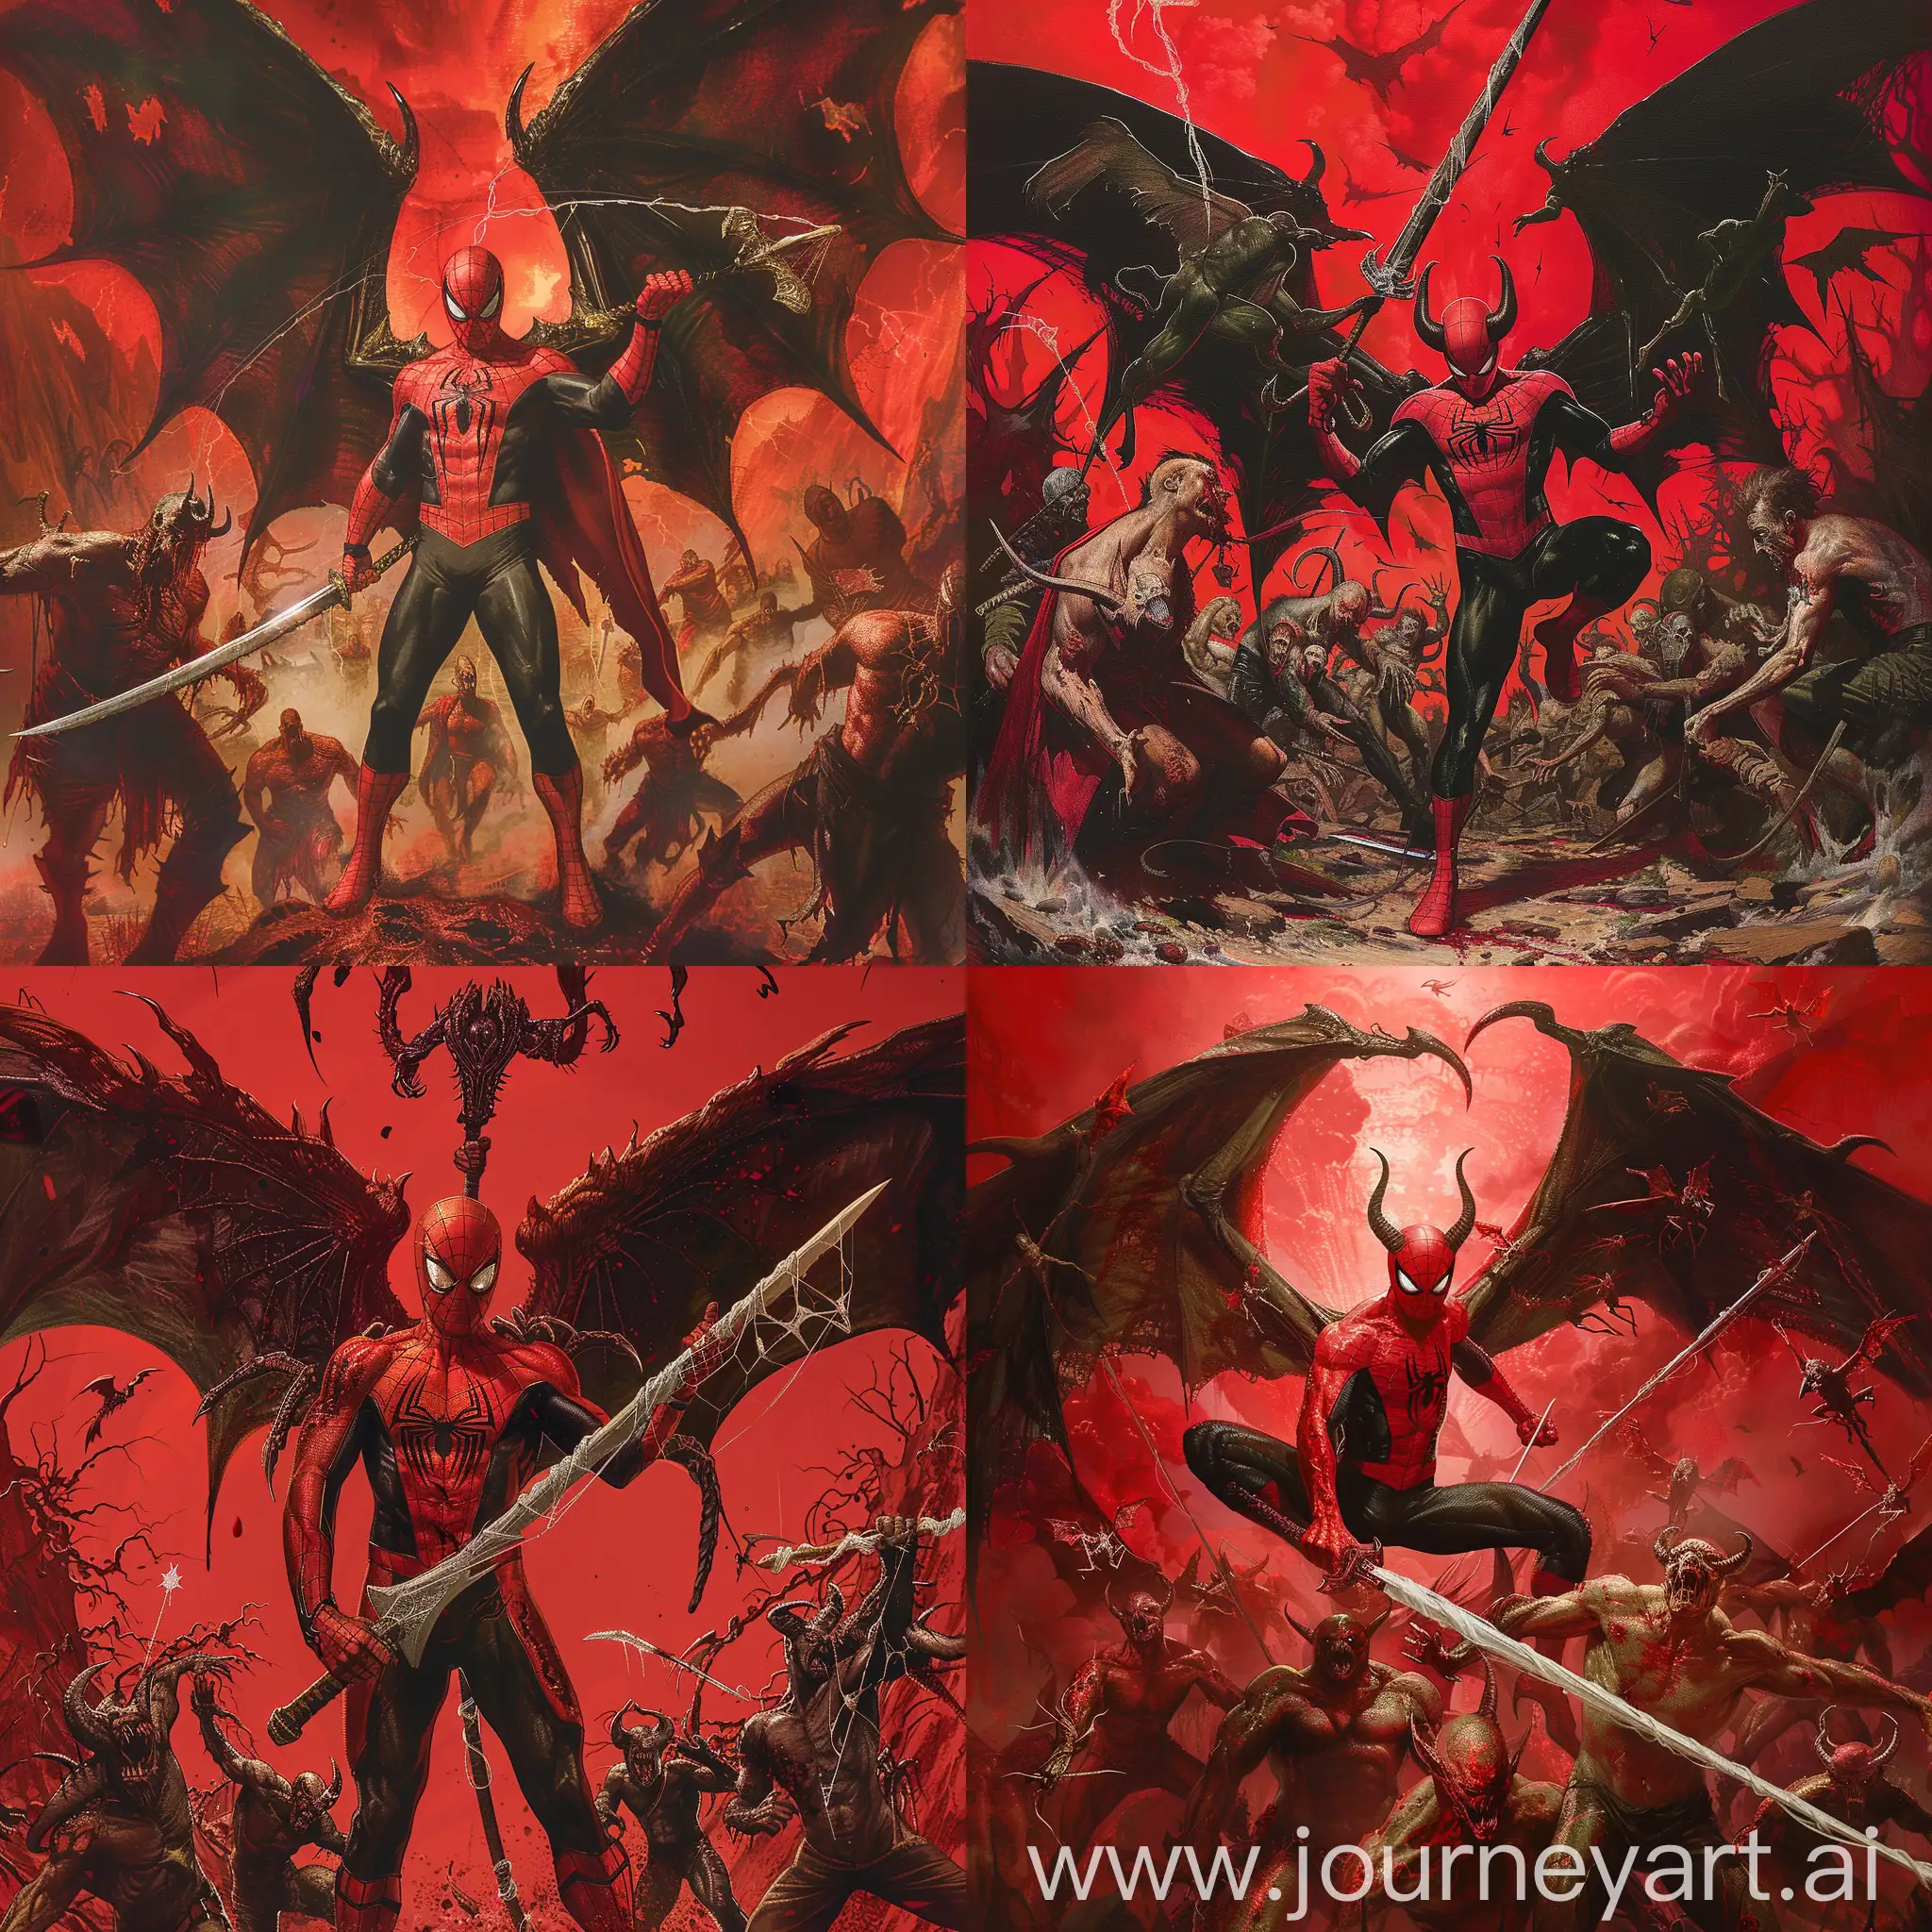 Malevolent-Spiderman-Commander-with-Satanic-Wings-and-Diabolic-Sword-Leading-Army-from-Hell